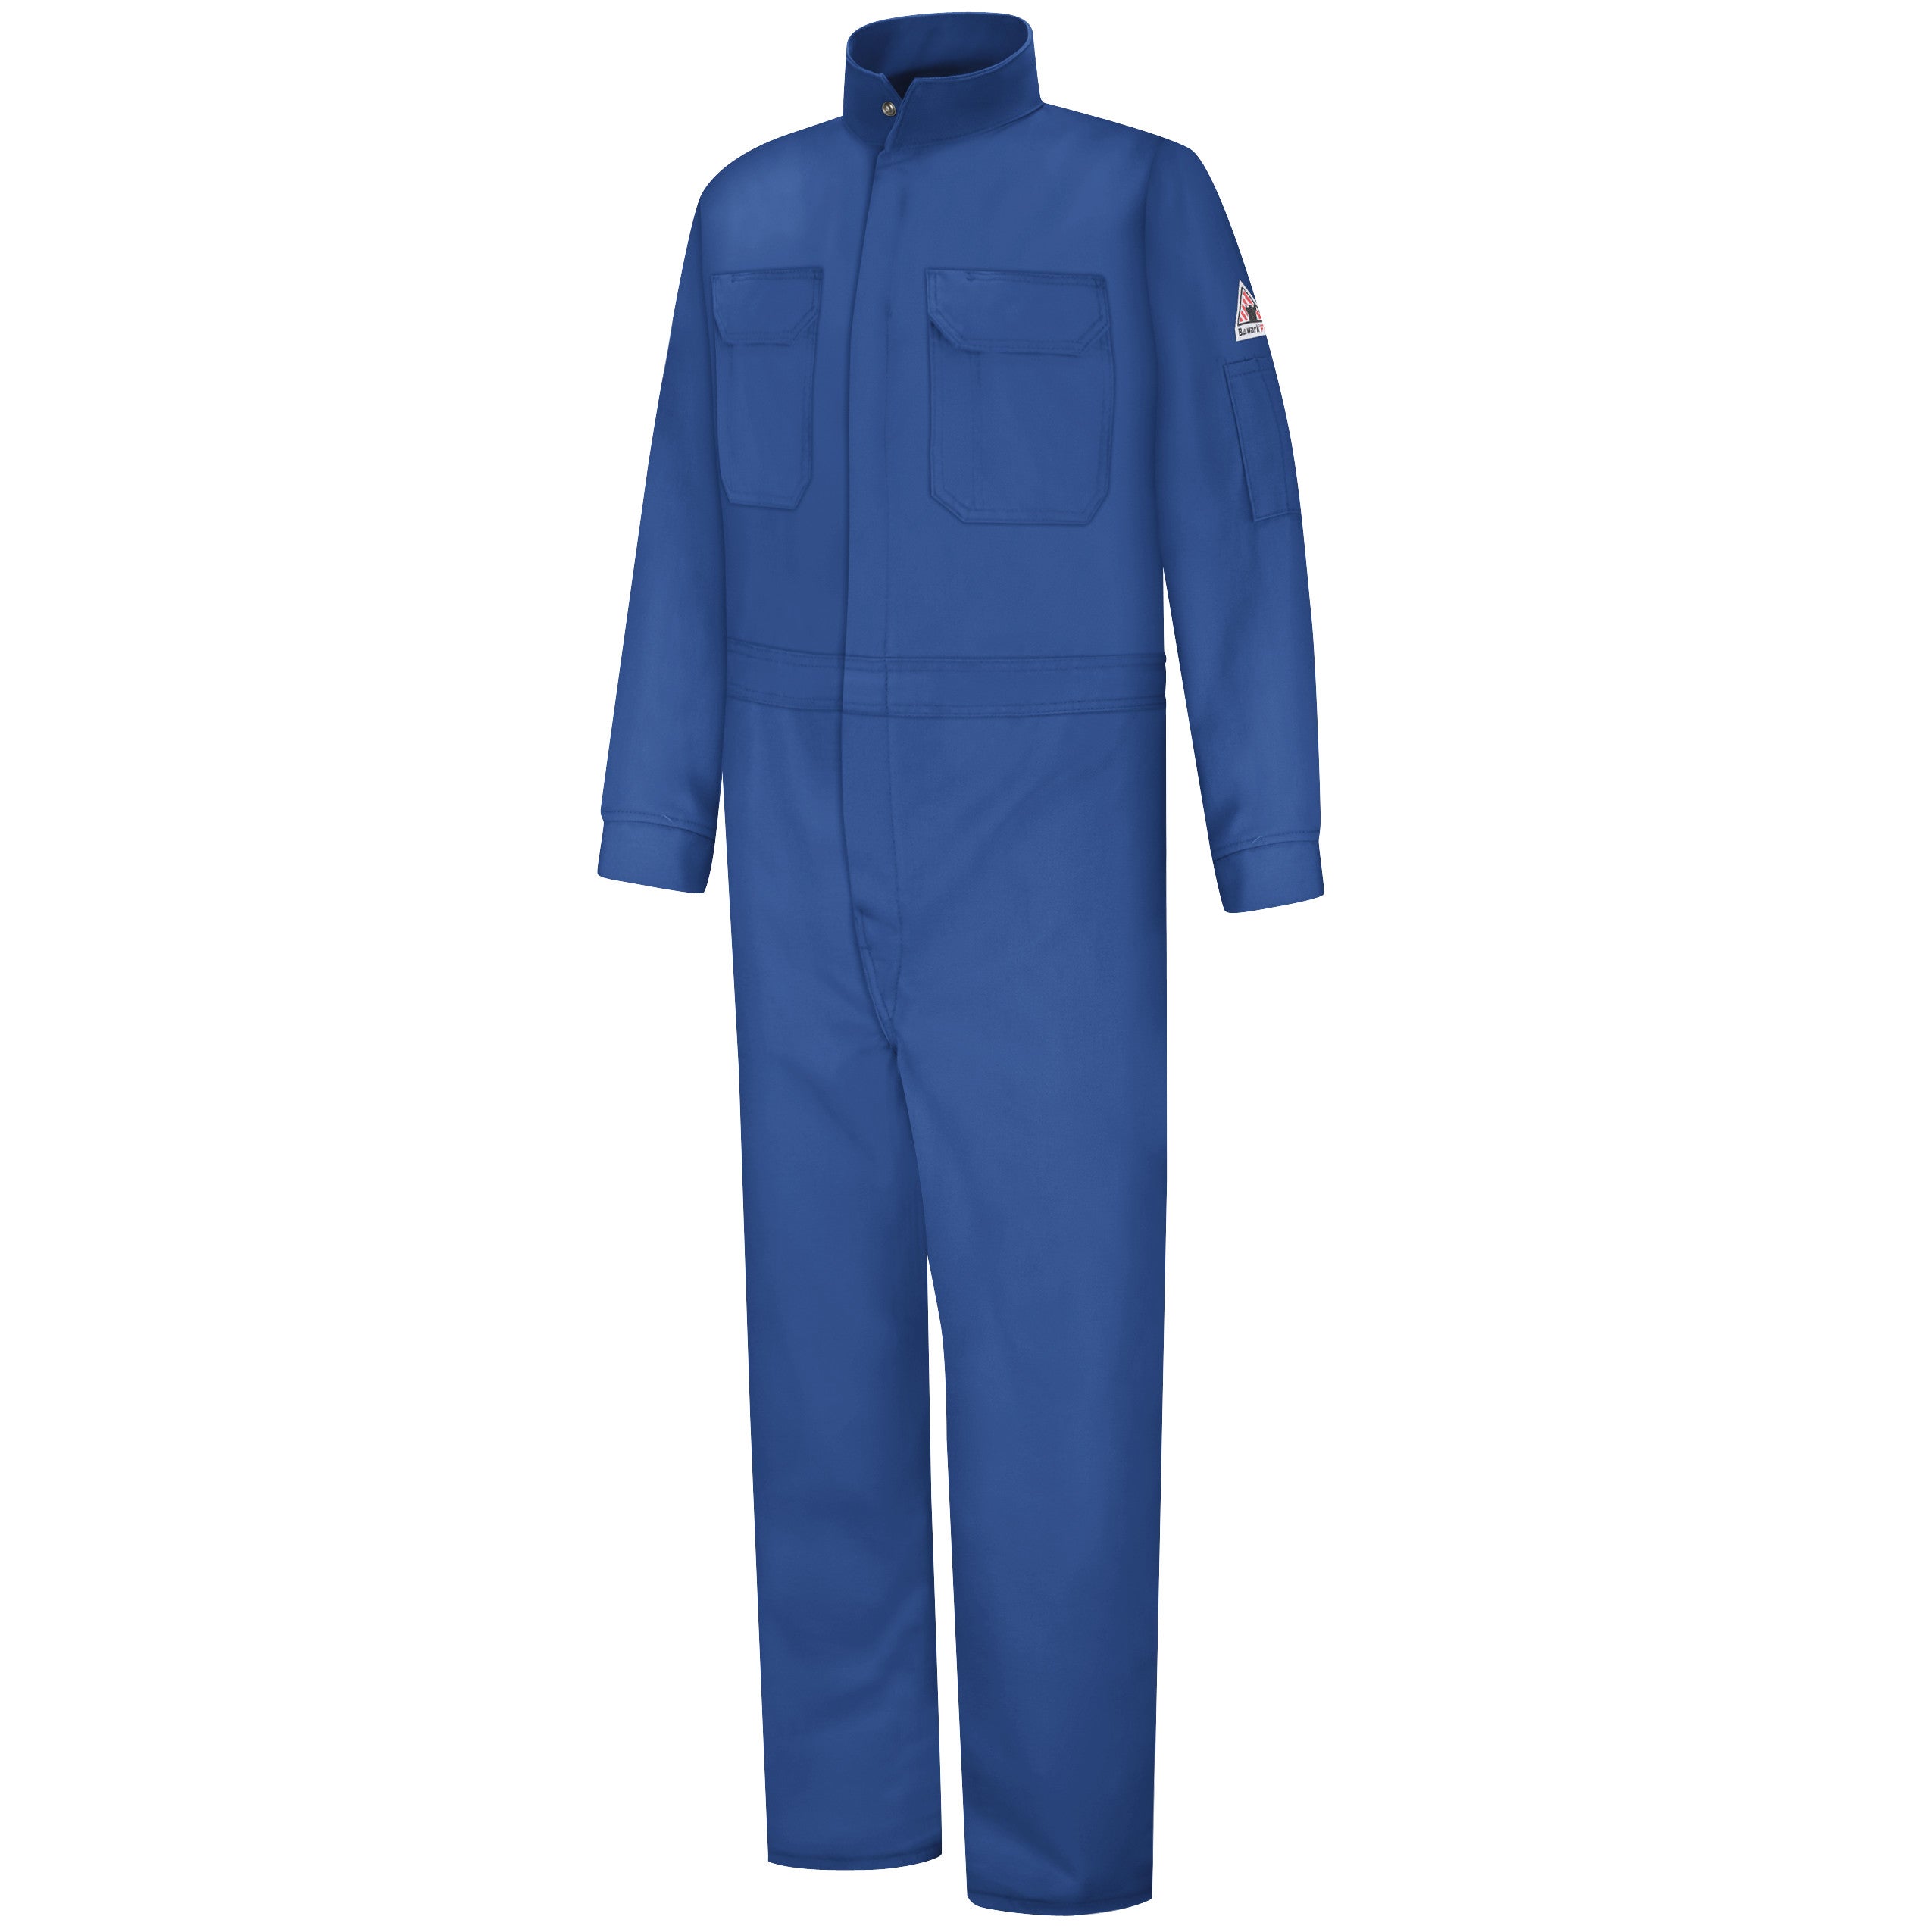 Women's Lightweight Excel FR® ComforTouch® Premium Coverall CLB3 - Royal Blue-eSafety Supplies, Inc